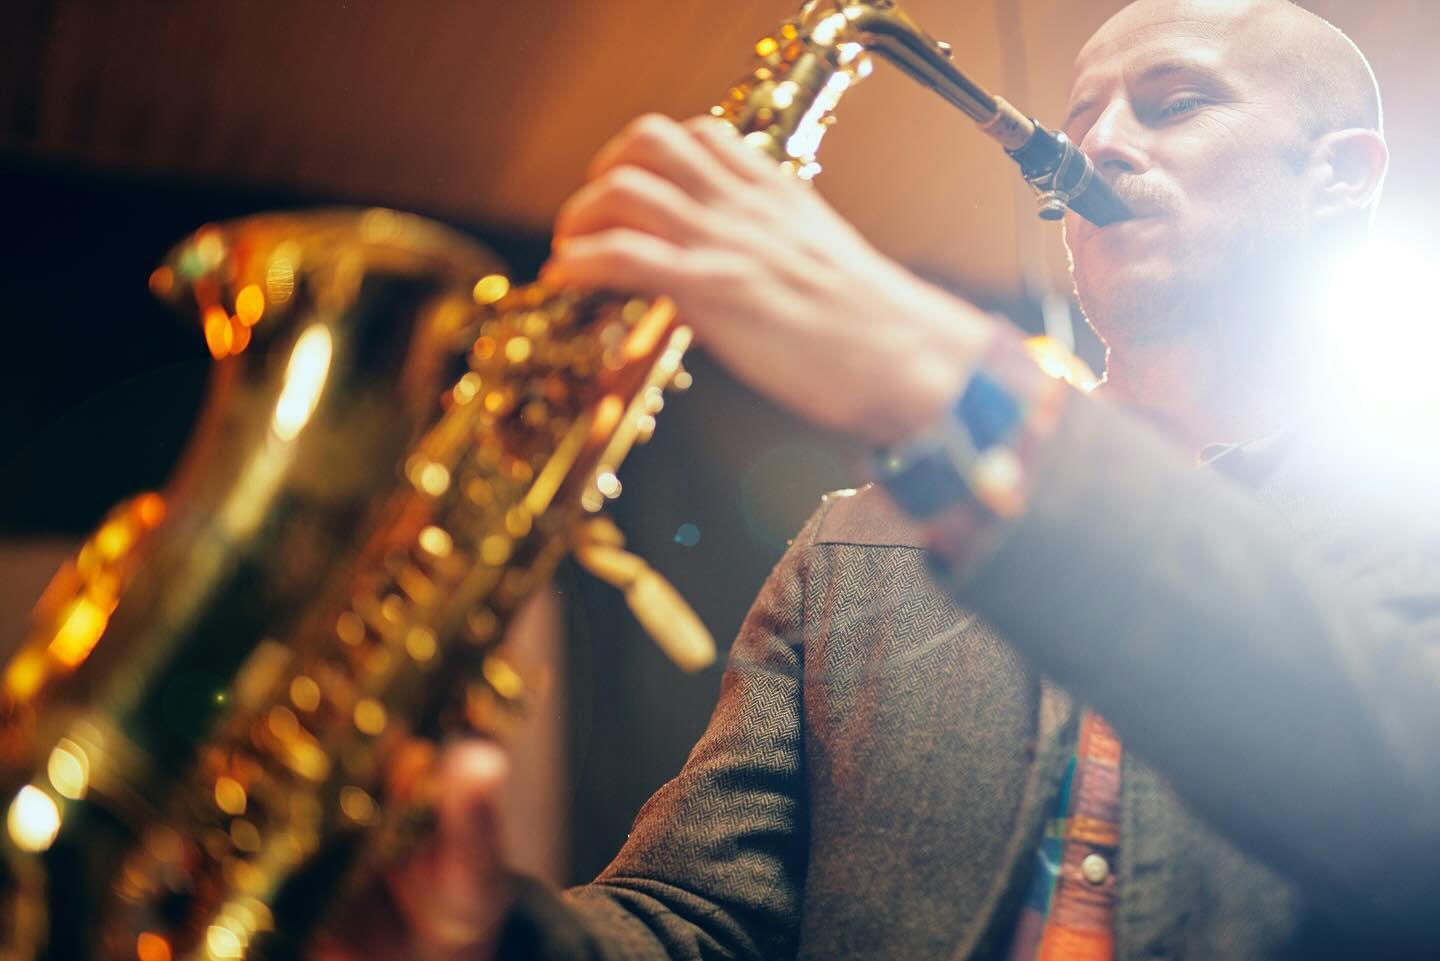 Featured Event April: Scottsdale Jazz, Blues &amp; Brews Festival. A day of New Orleans flavor and sound on Saturday, April 27th. Absorb the music and dance the night away at Scottsdale Civic Center&rsquo;s newly renovated, open-air East Bowl and Amp